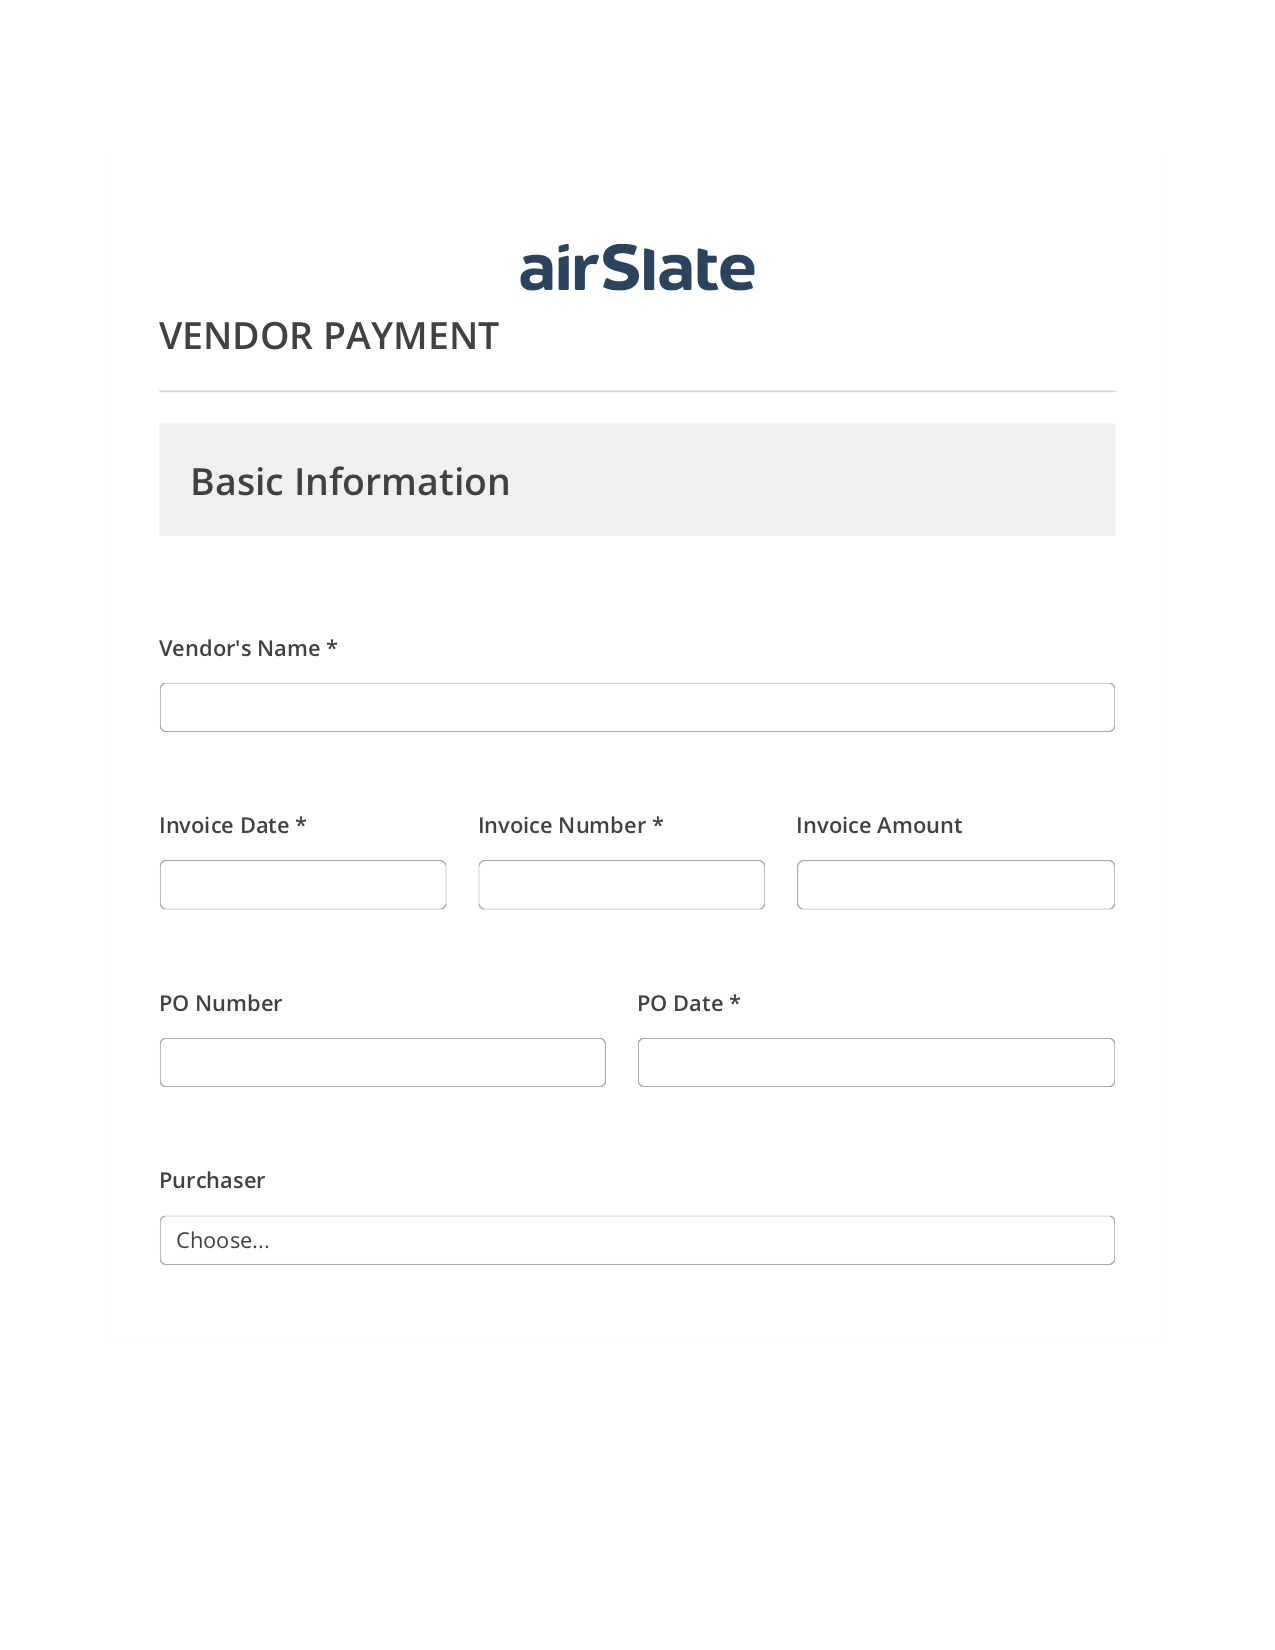 Vendor Payment Flow Pre-fill from CSV File Bot